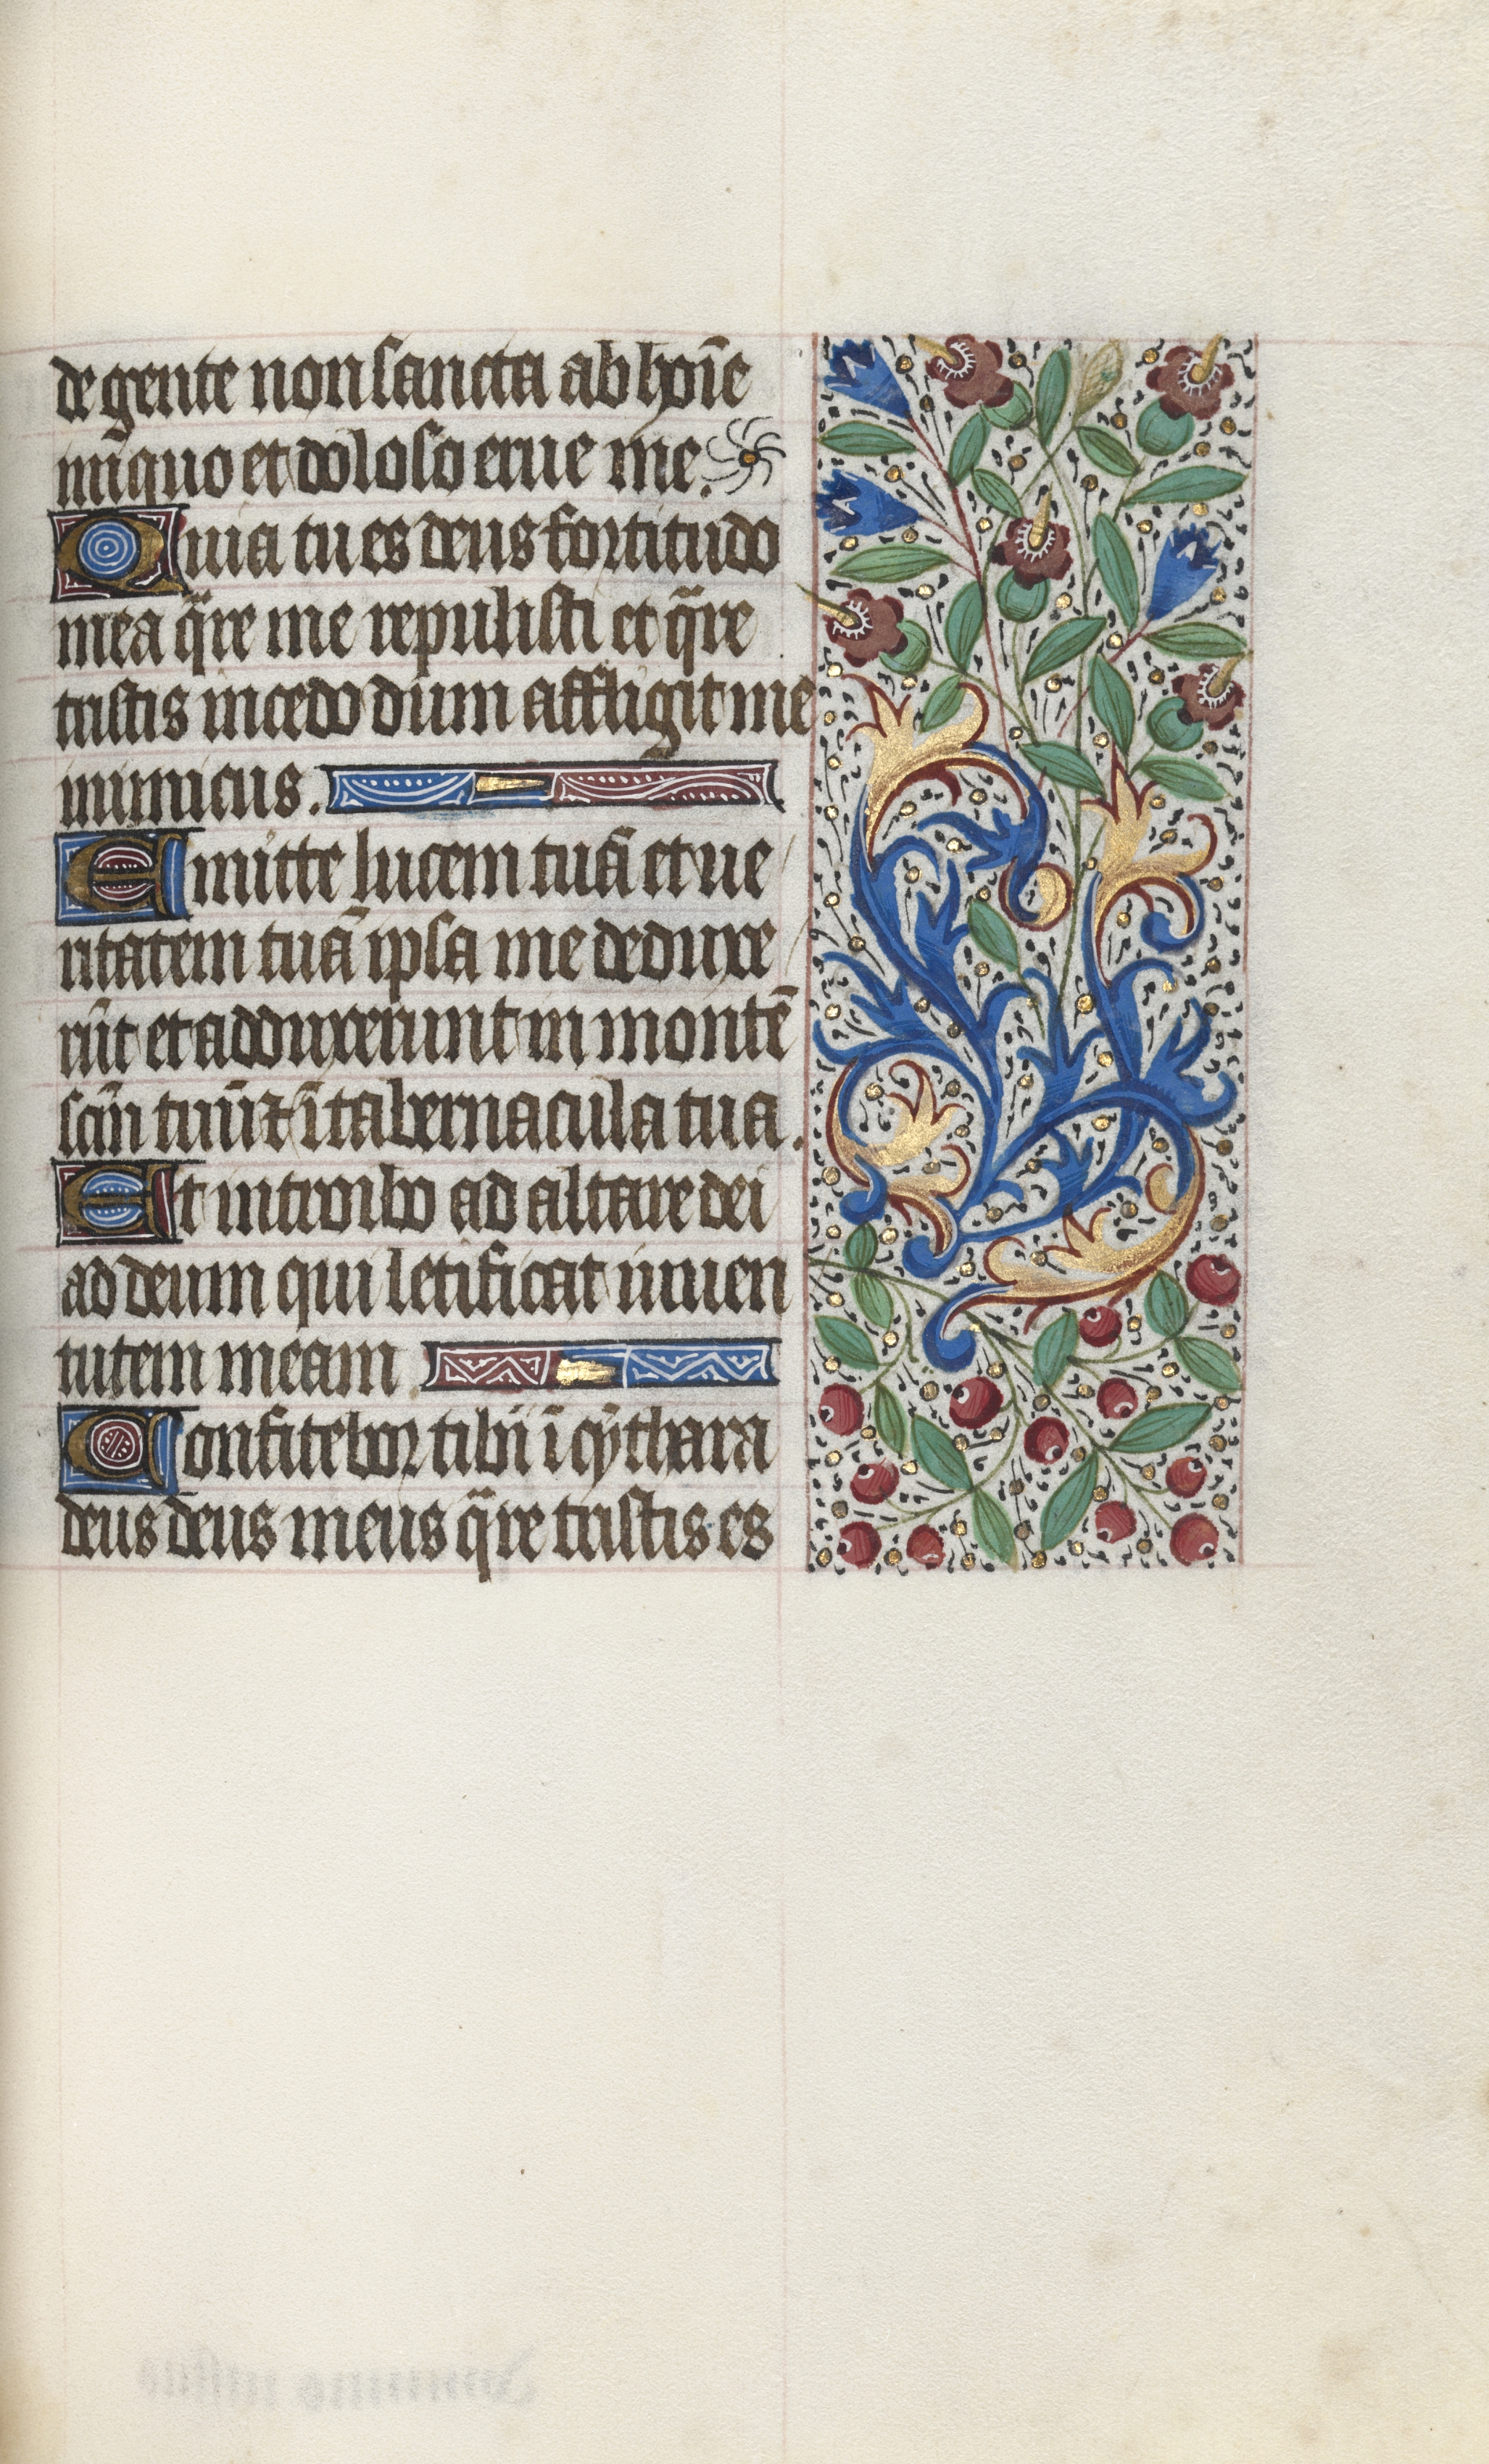 Book of Hours (Use of Rouen): fol. 76r